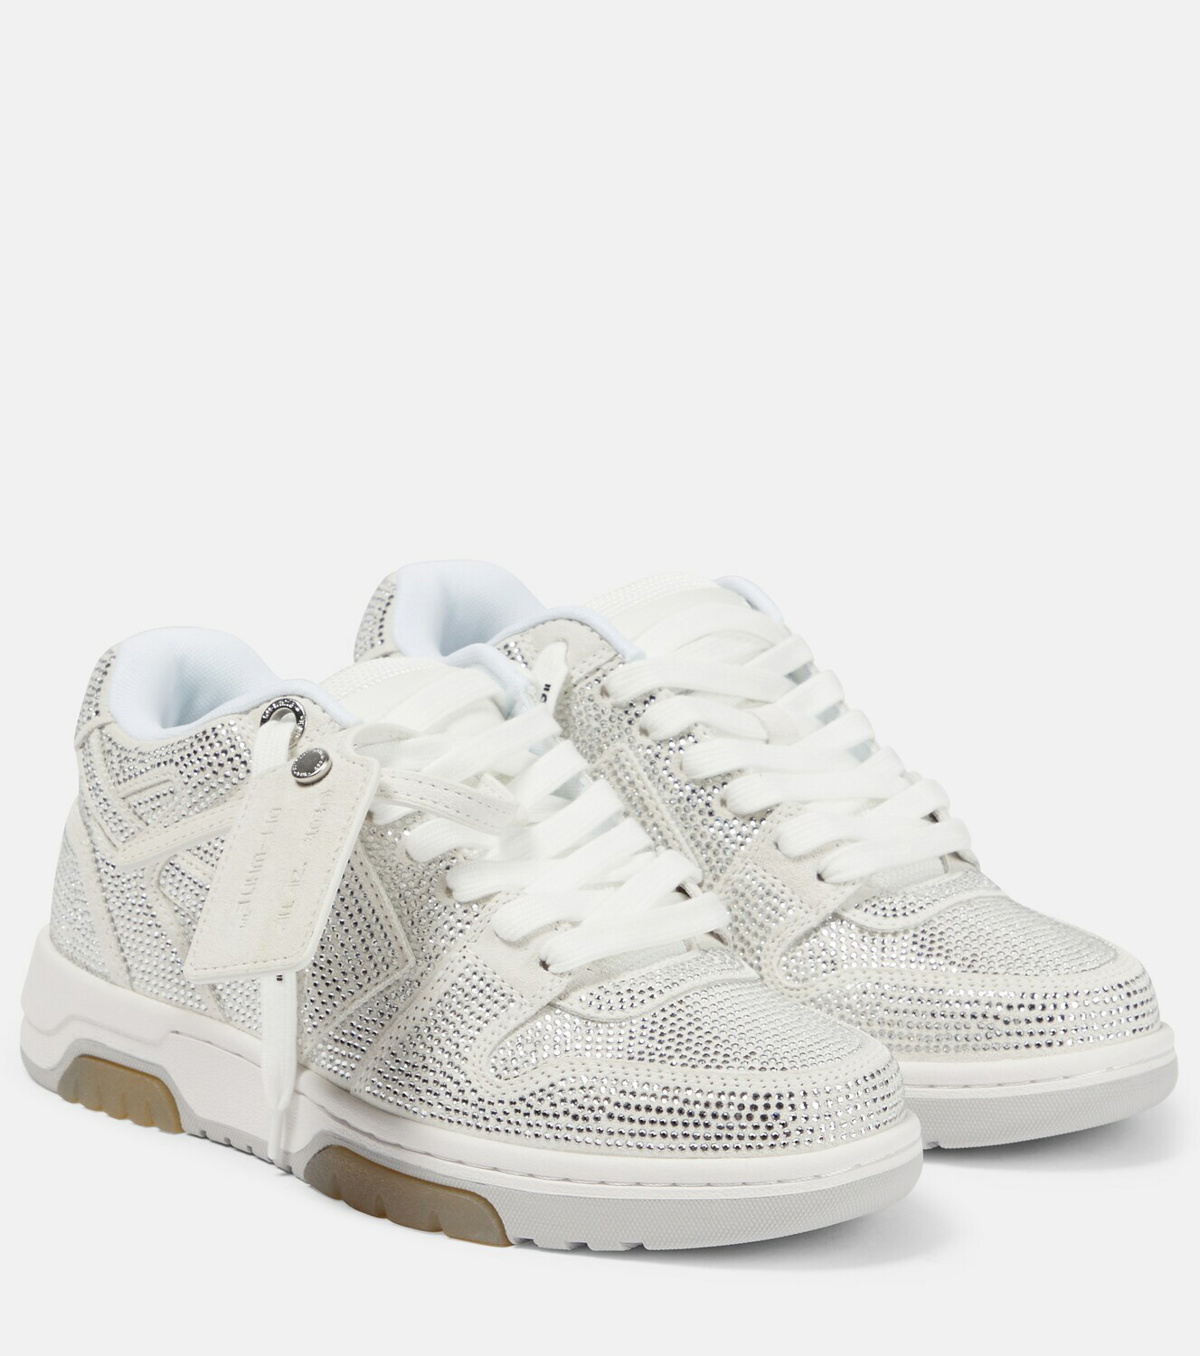 Out of Office Sneakers in White/Silver Leather